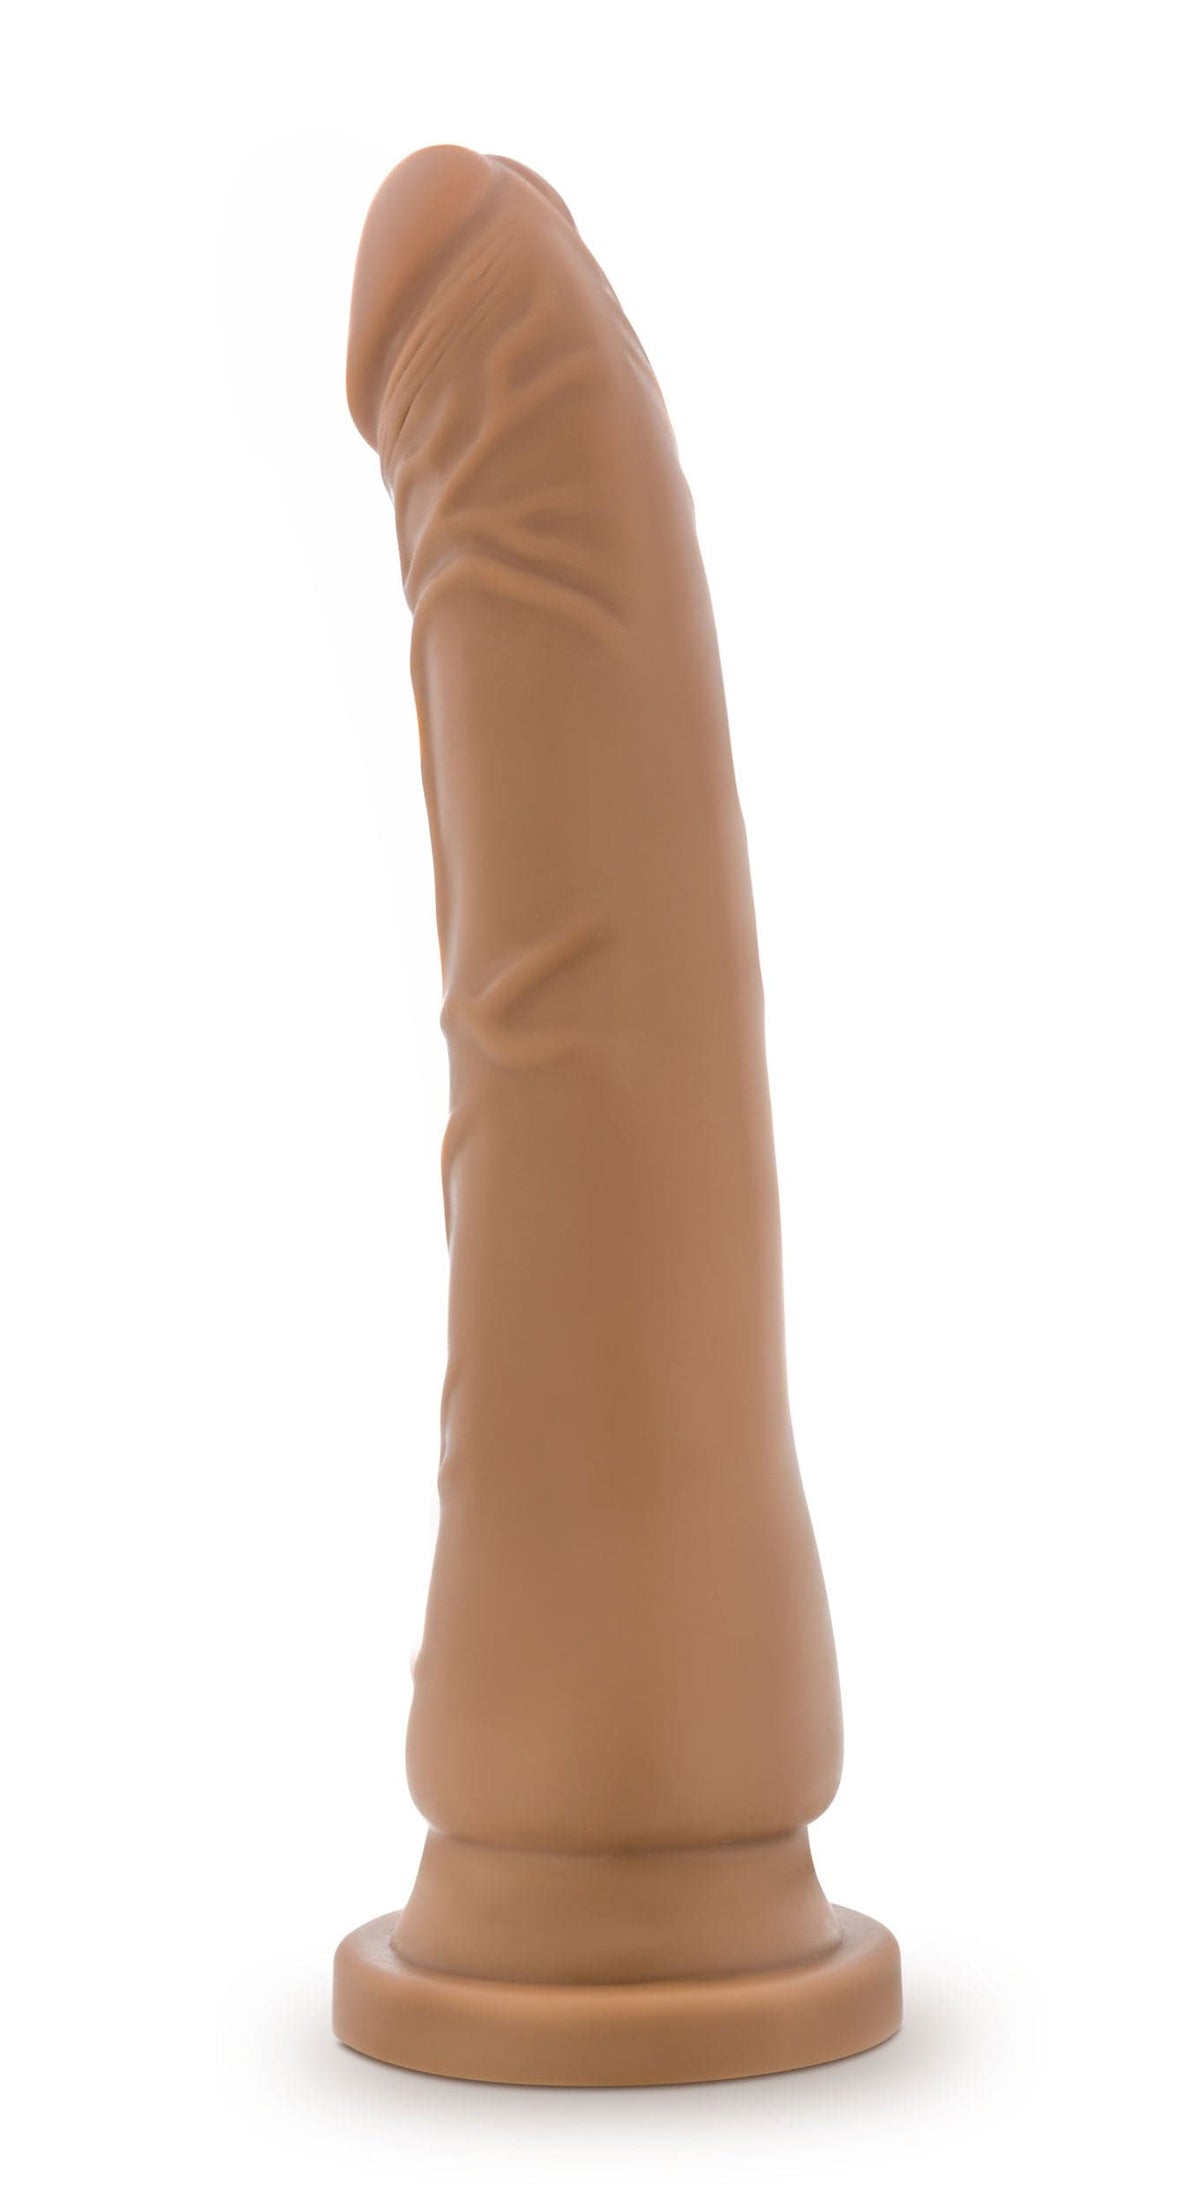 dr skin silicone dr noah 8 inch dong with suction cup mocha